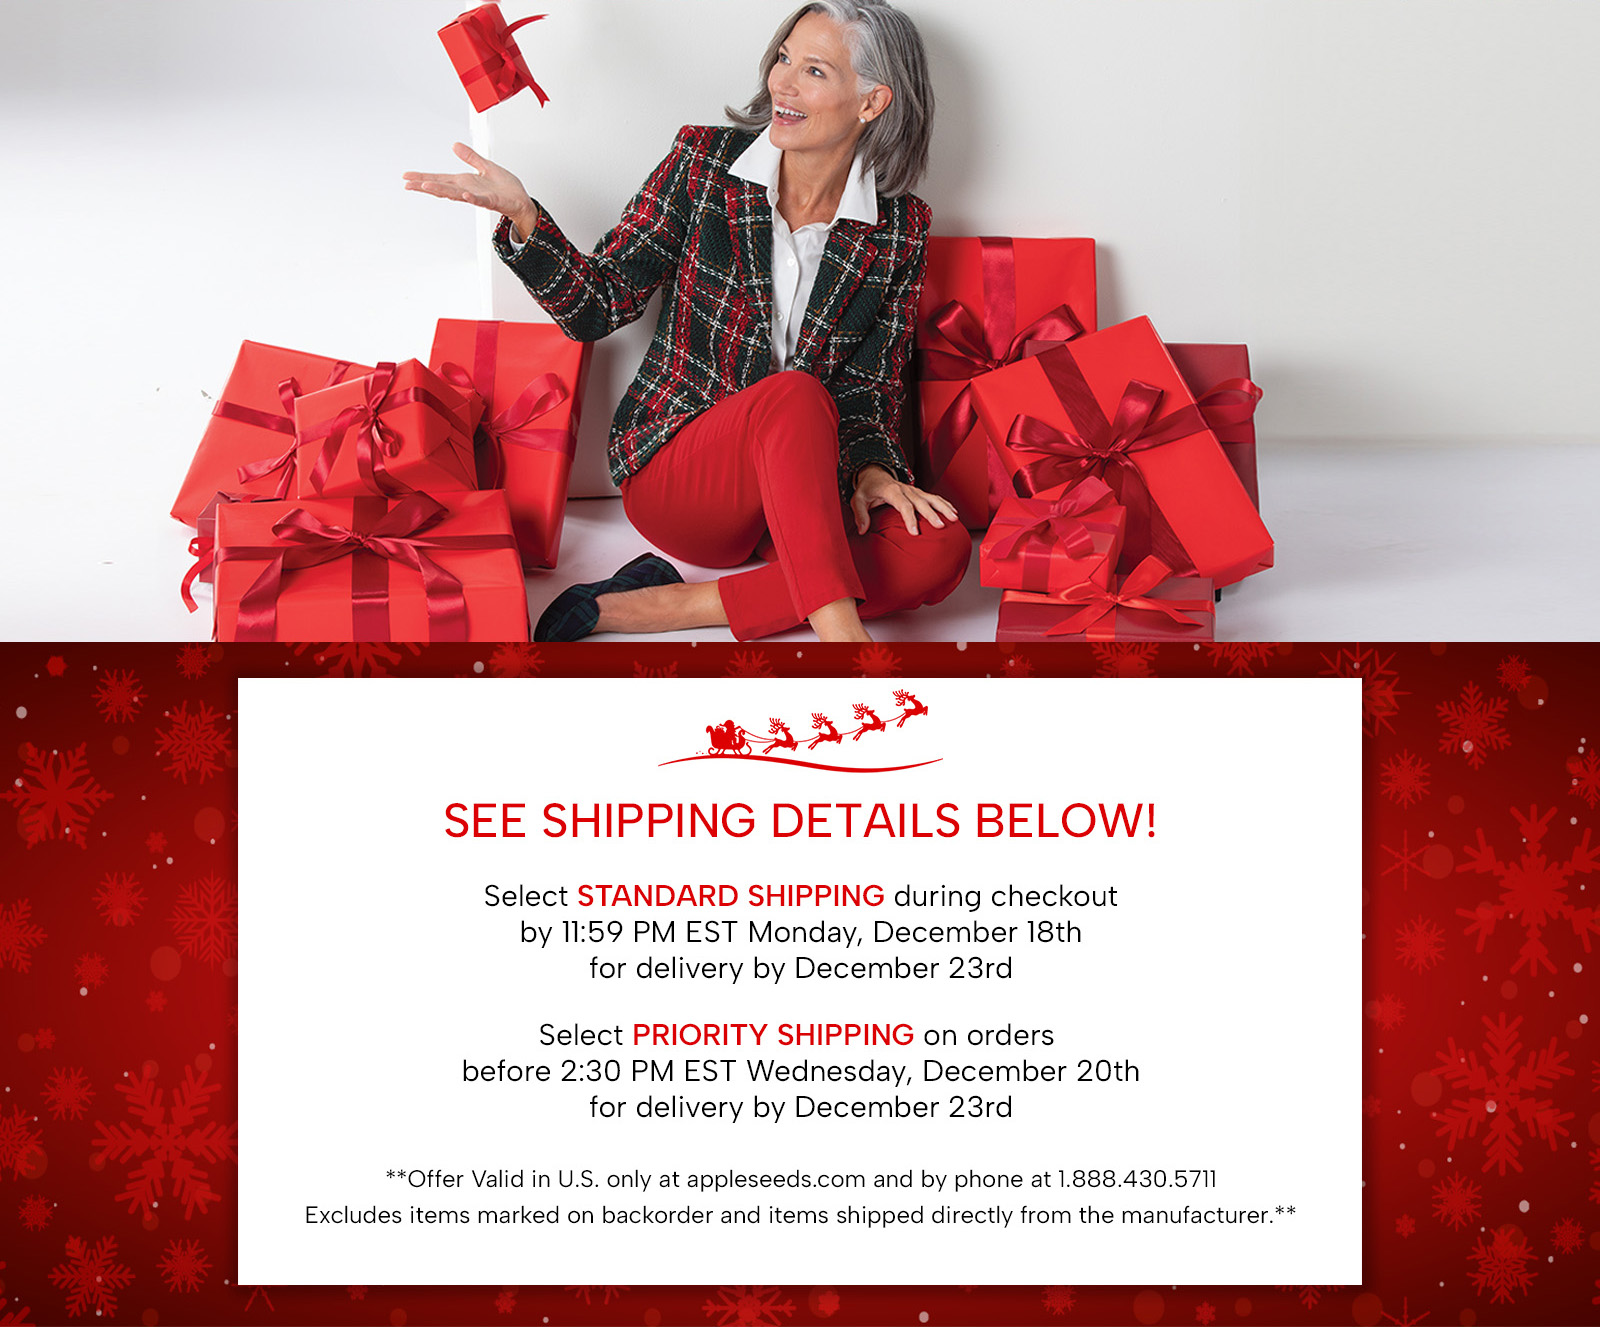 There'll be parties for hosting and cocktails for toasting! See shipping details below. Select standard shipping during checkout by 11:59PM EST Monday, December 18th for delivery by December 23rd. Select Priority shipping on orders  before 2:30 PM EST Wednesday, December 20th for delivery by December 23rd ** Offer valid in U.S. only at Appleseeds.com and by phone at 1-800-252-7400. Excludes items marked on backorder and items shipped directly from the manufacturer.**